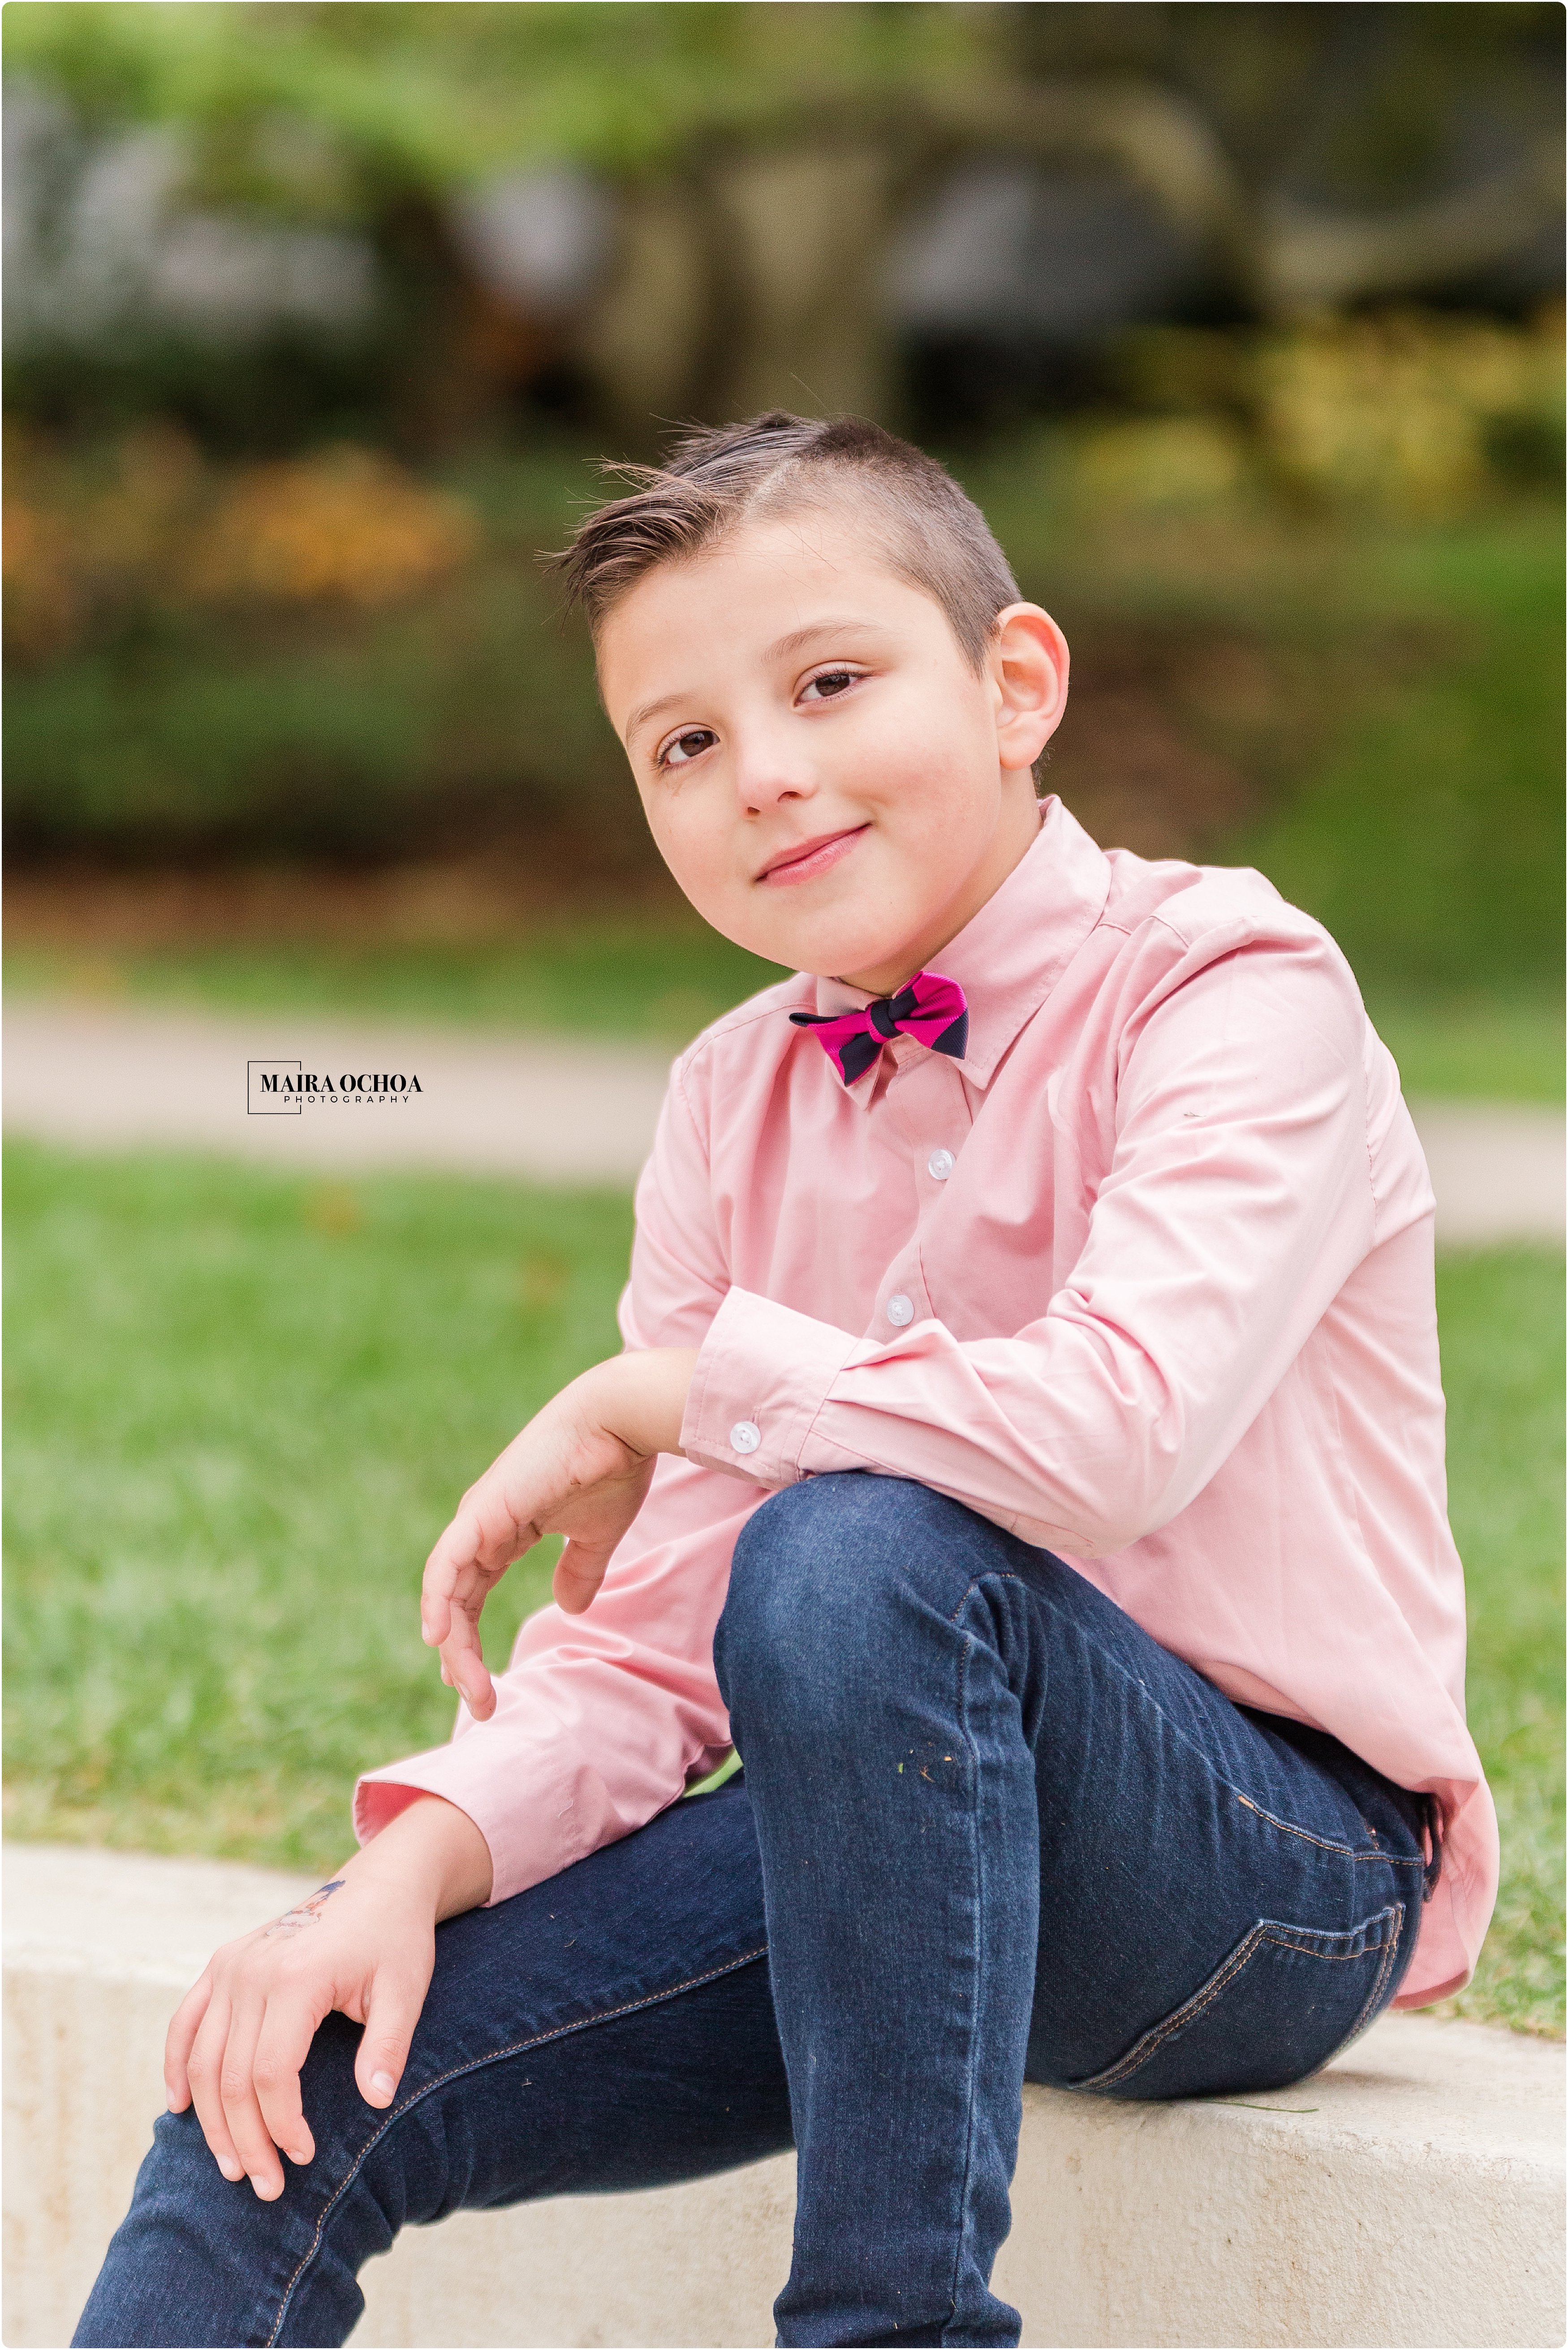 Cantigny Park, Wheaton, IL Family Session, Maternity Session, Children photos, Brothers, Kids, Expecting, Mother and son